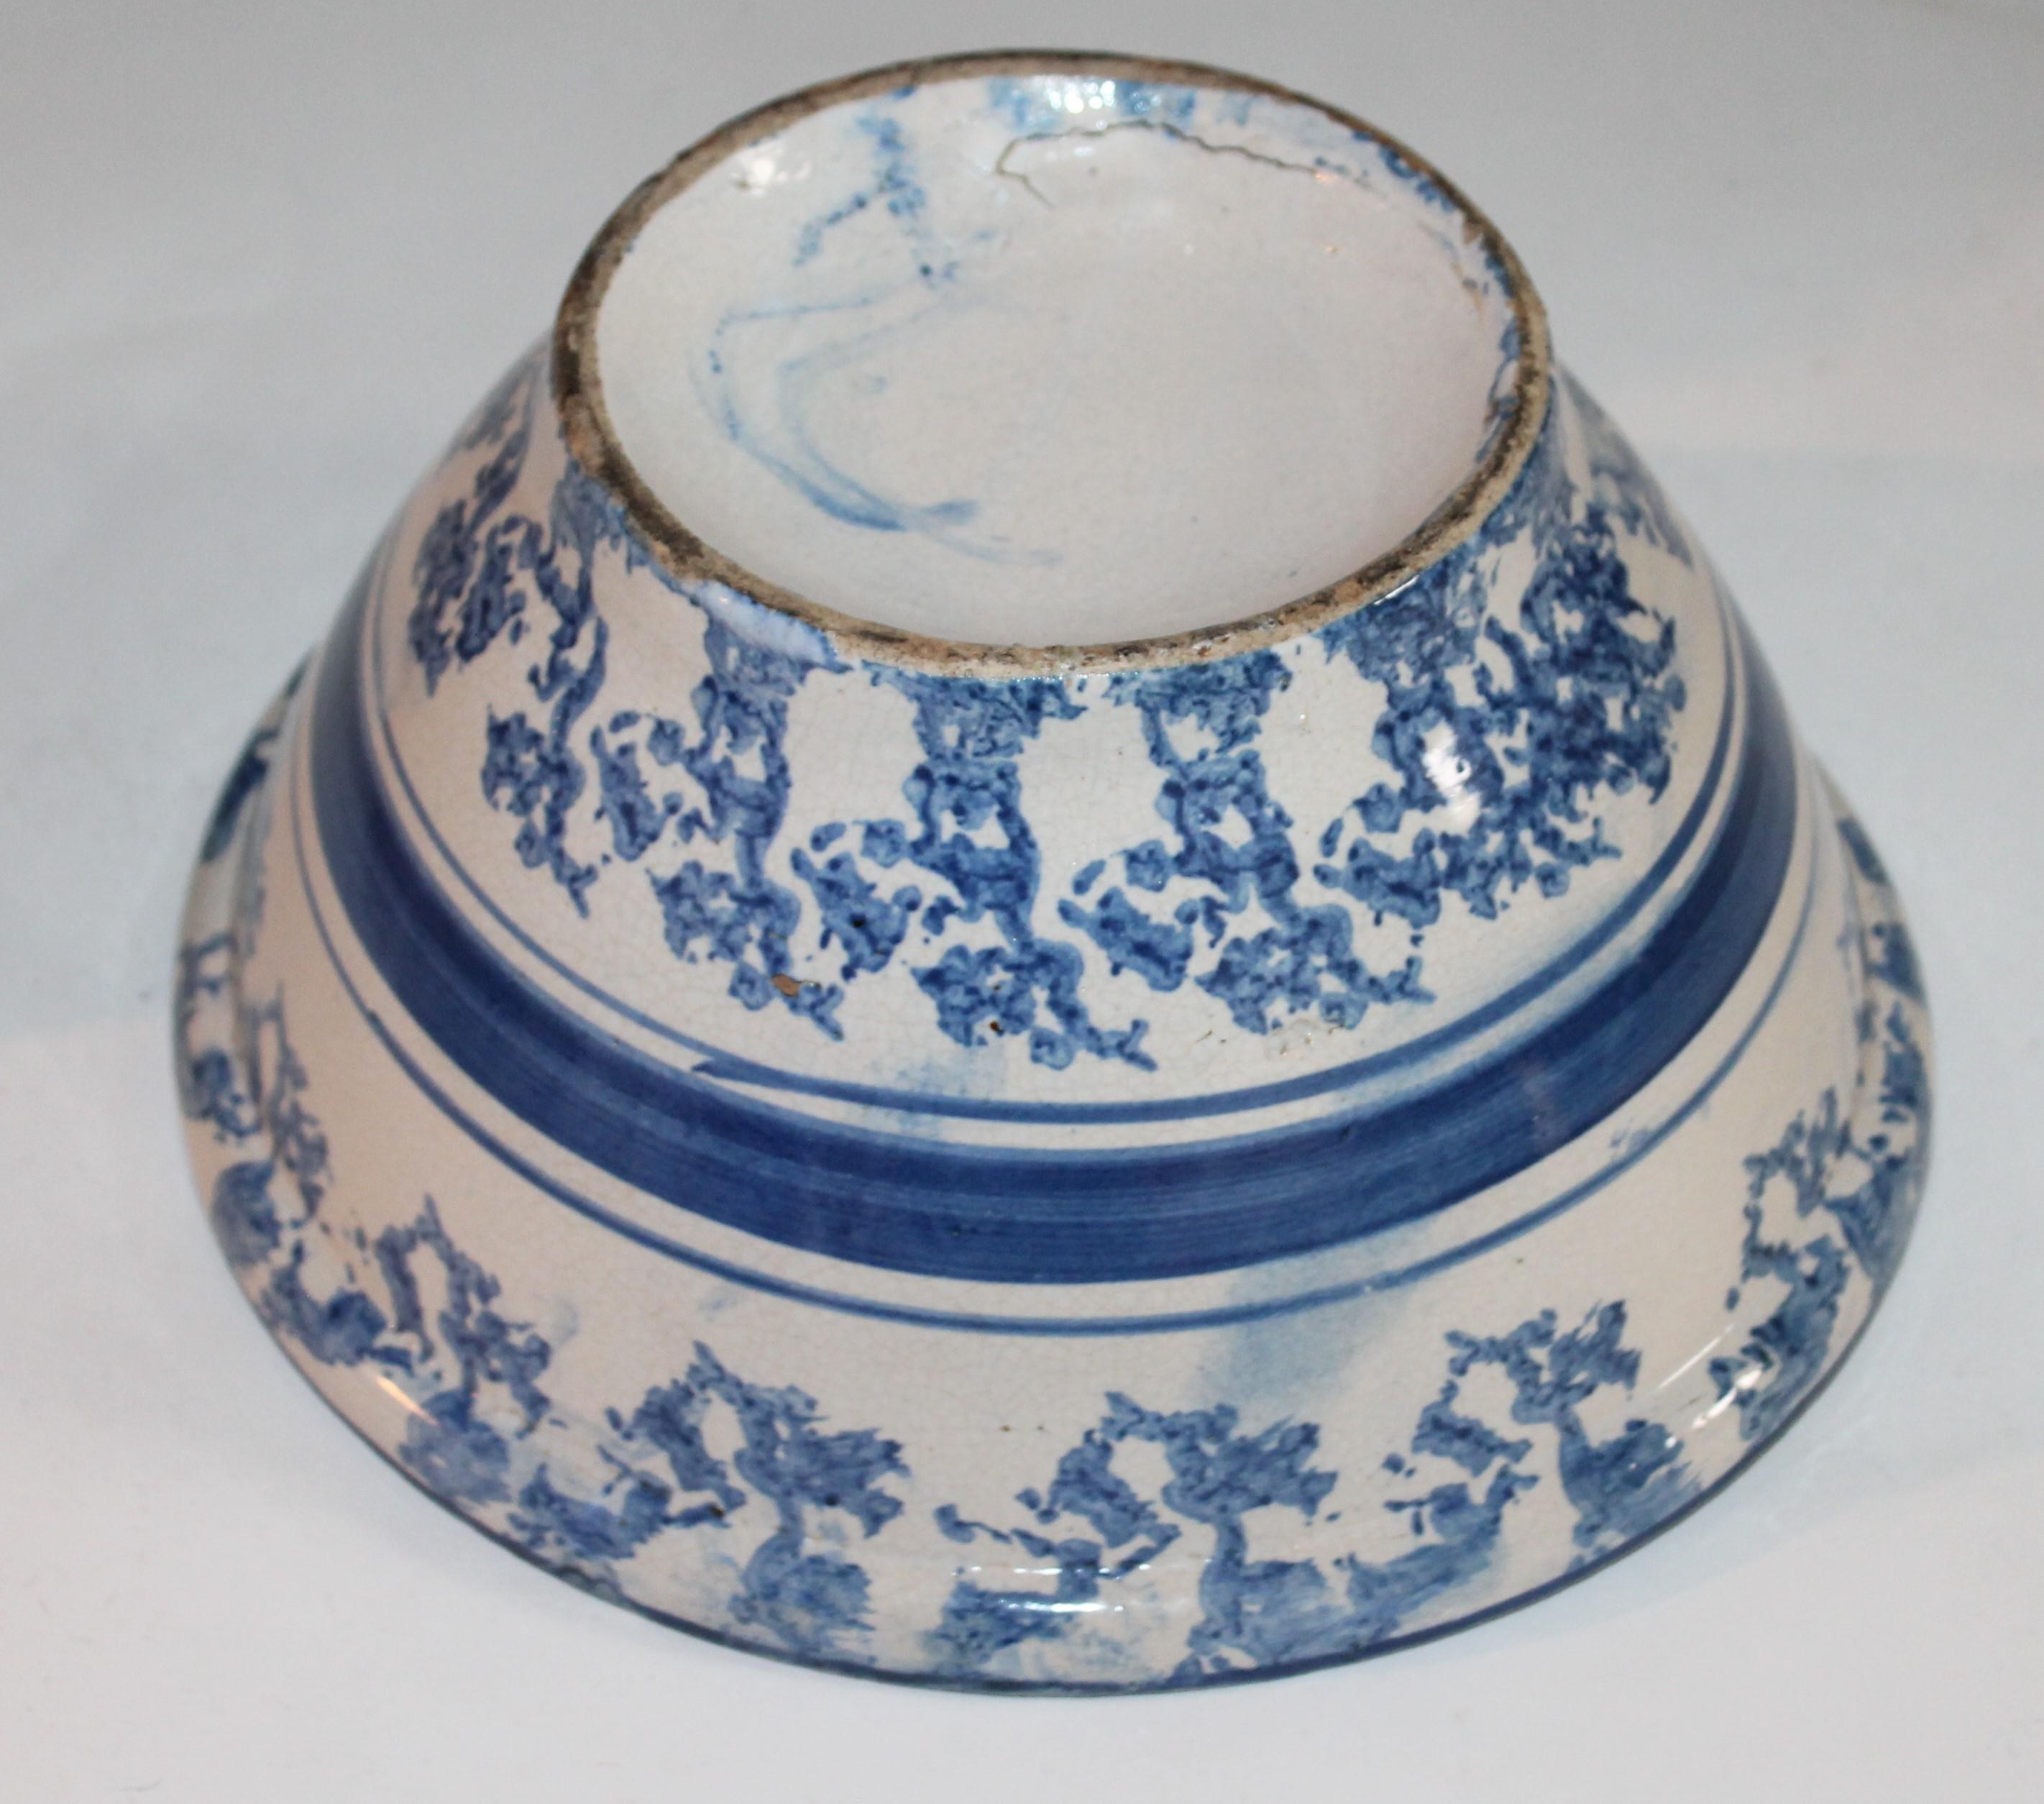 Sponge Ware Pottery Bowl, 19th Century In Excellent Condition For Sale In Los Angeles, CA